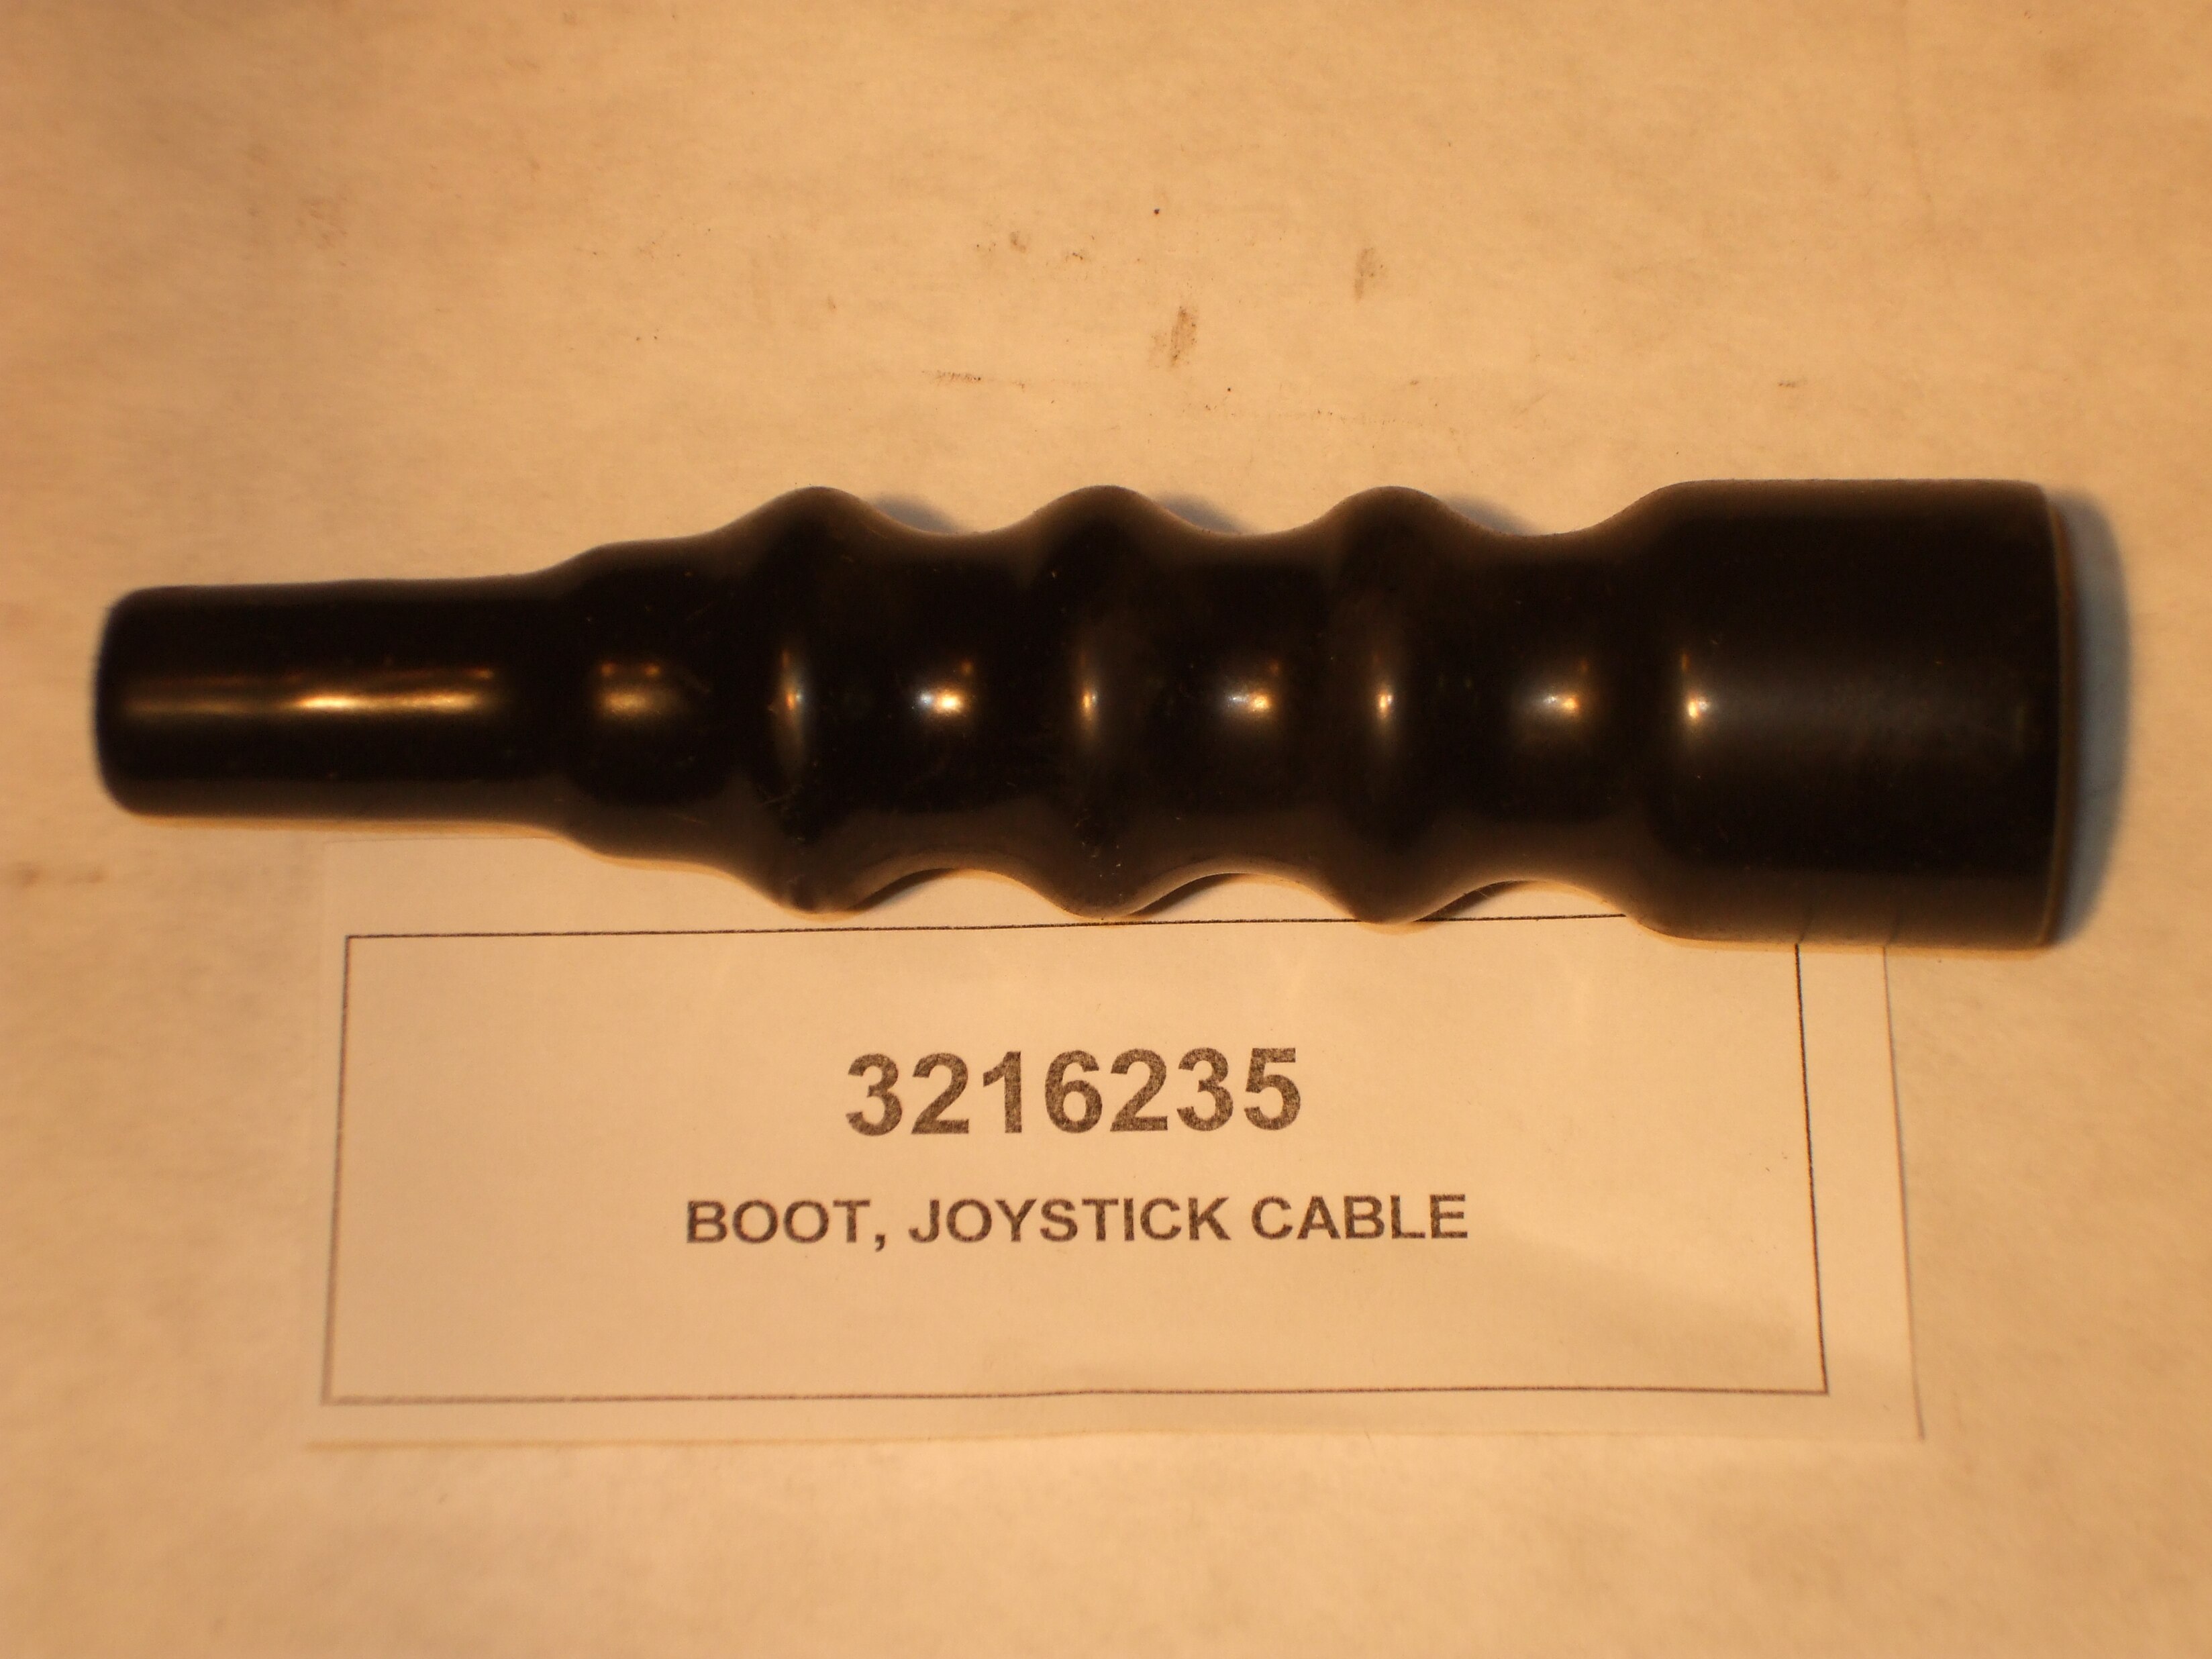 BOOT, JOYSTICK CABLE